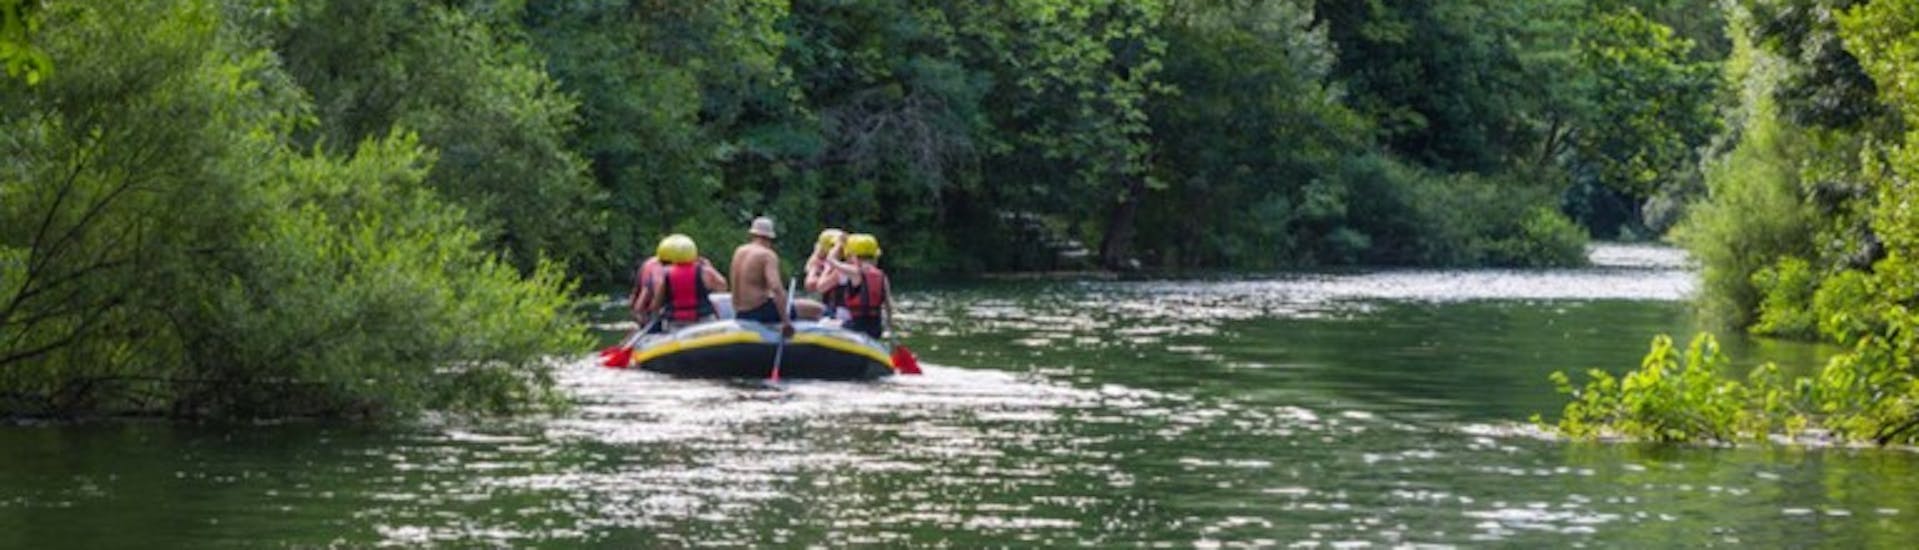 Private Rafting Tour on the River Cetina from Zadvarje With Pick-up Service.